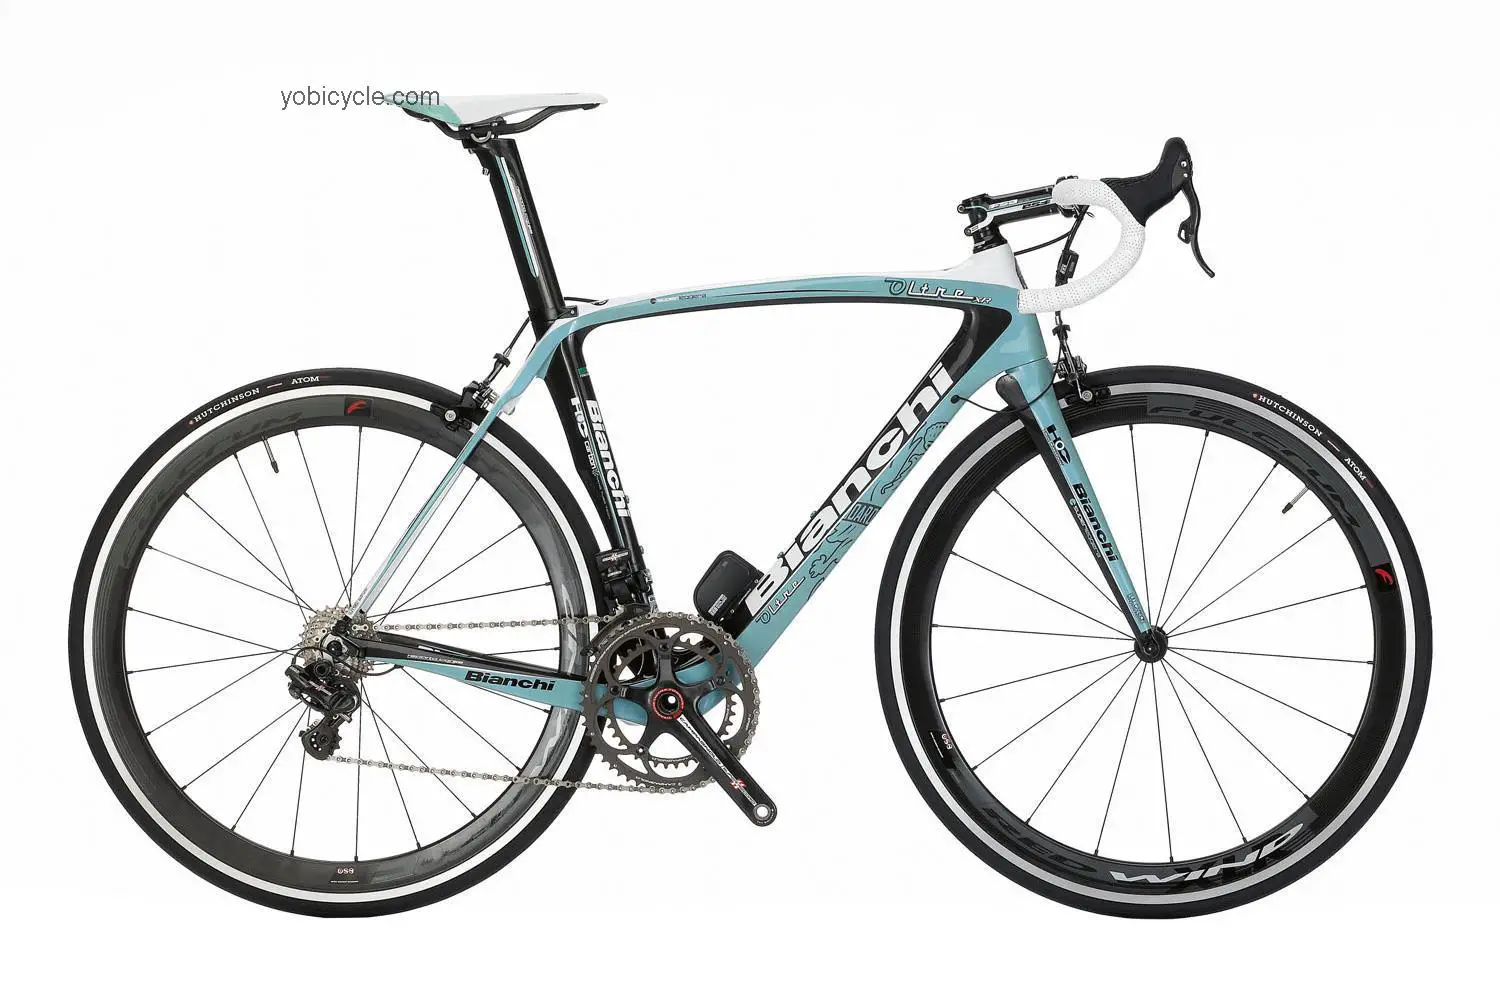 Bianchi Oltre XR Super Record EPS 2013 comparison online with competitors